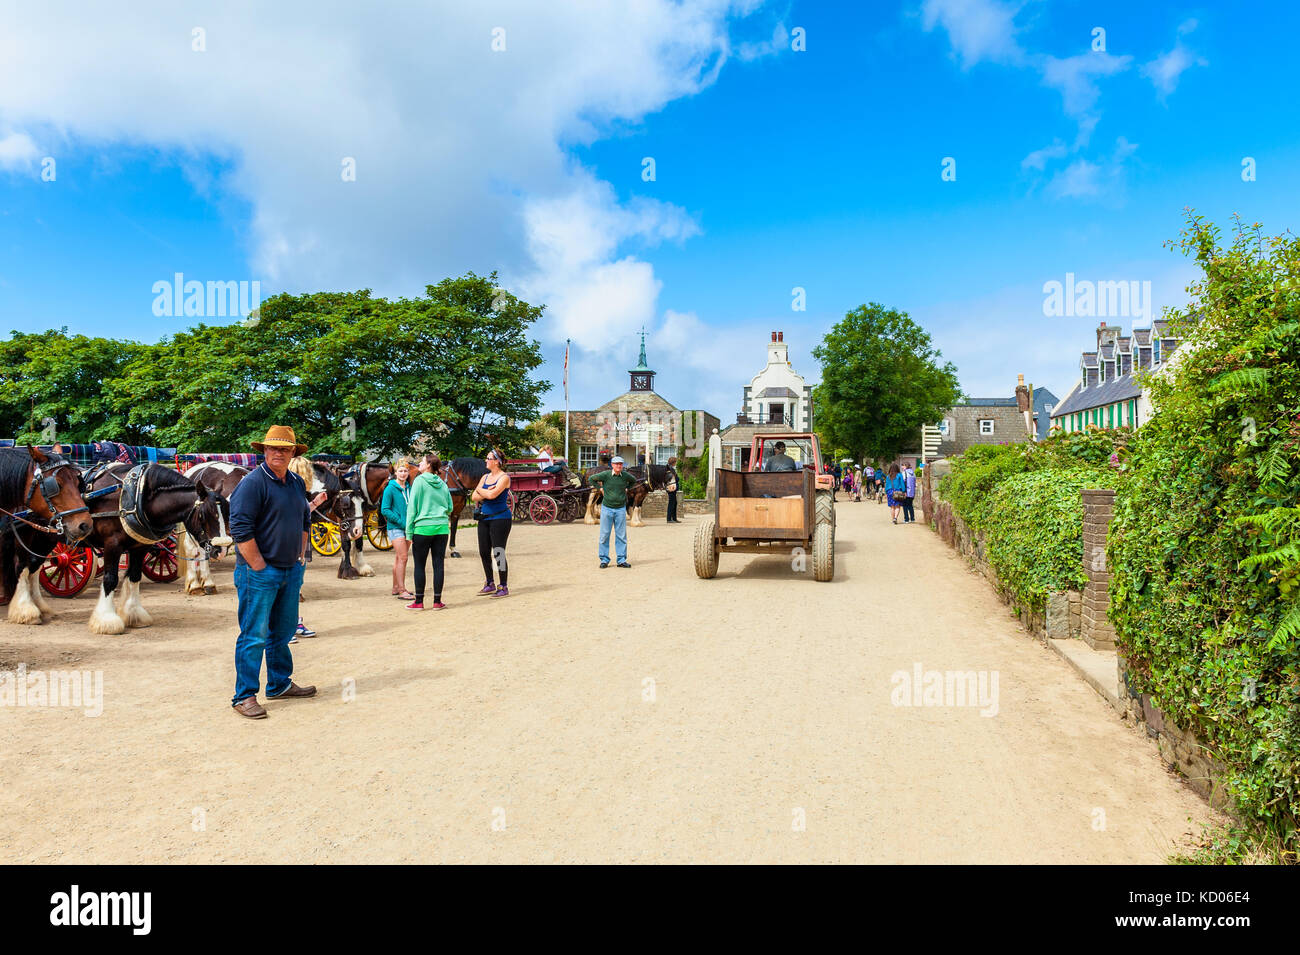 Unpaved street with Horse Carriages in The Village, the center of Sark, Channel Islands, UK. No cars or trucks are allowed on Sark. Stock Photo